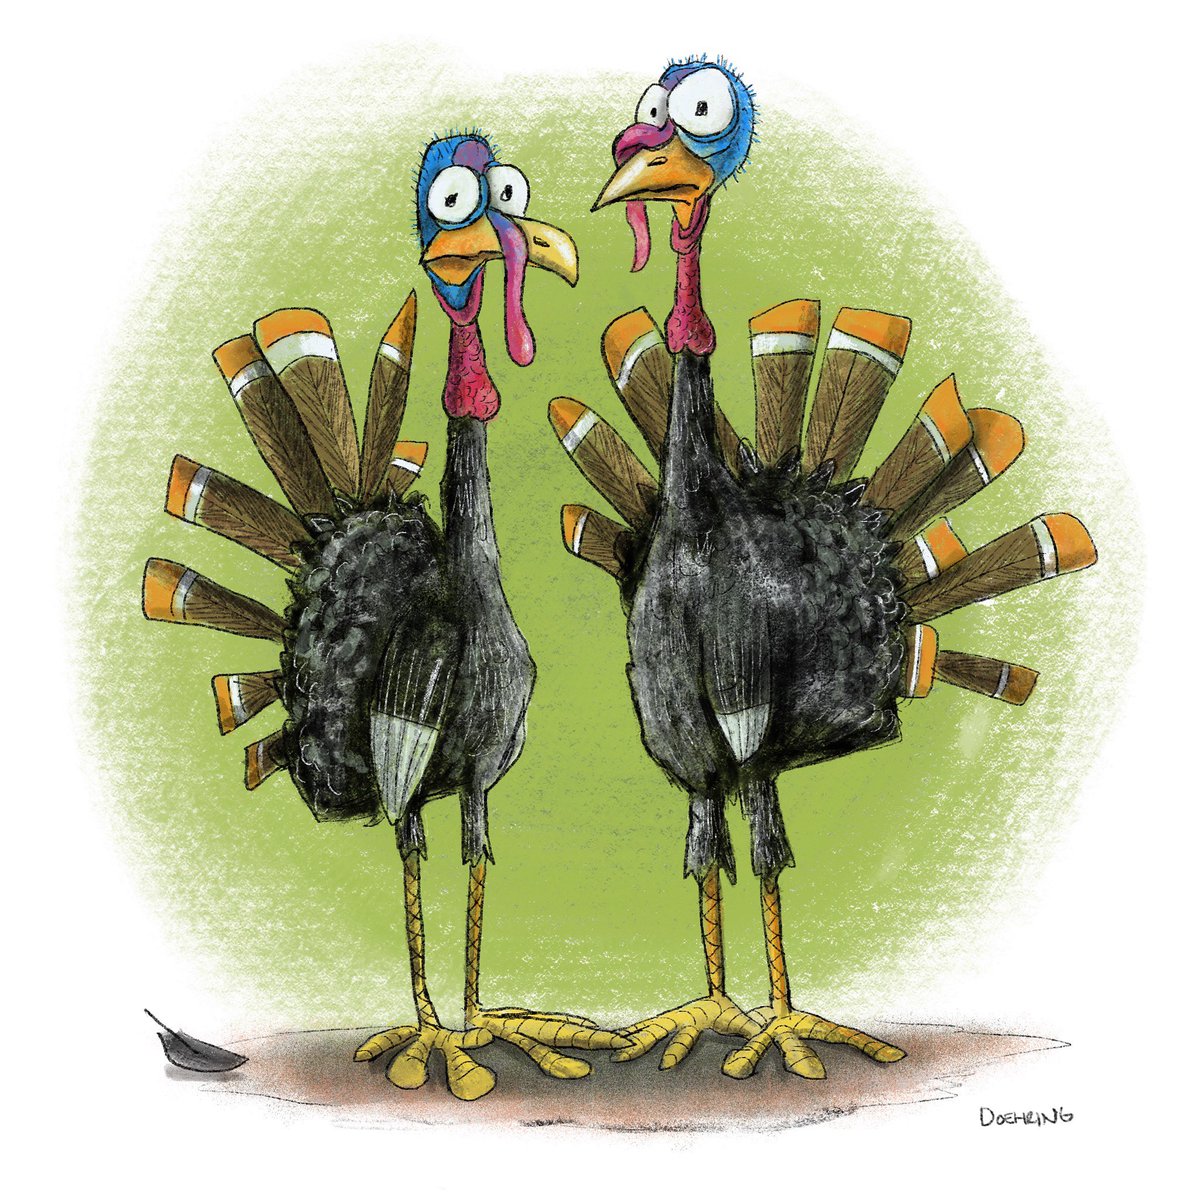 “Why are you looking at us like that?”

#kidlit #kidlitart #kidlitillustration #illustrator #illustration #thanksgiving #cartoon #turkeys